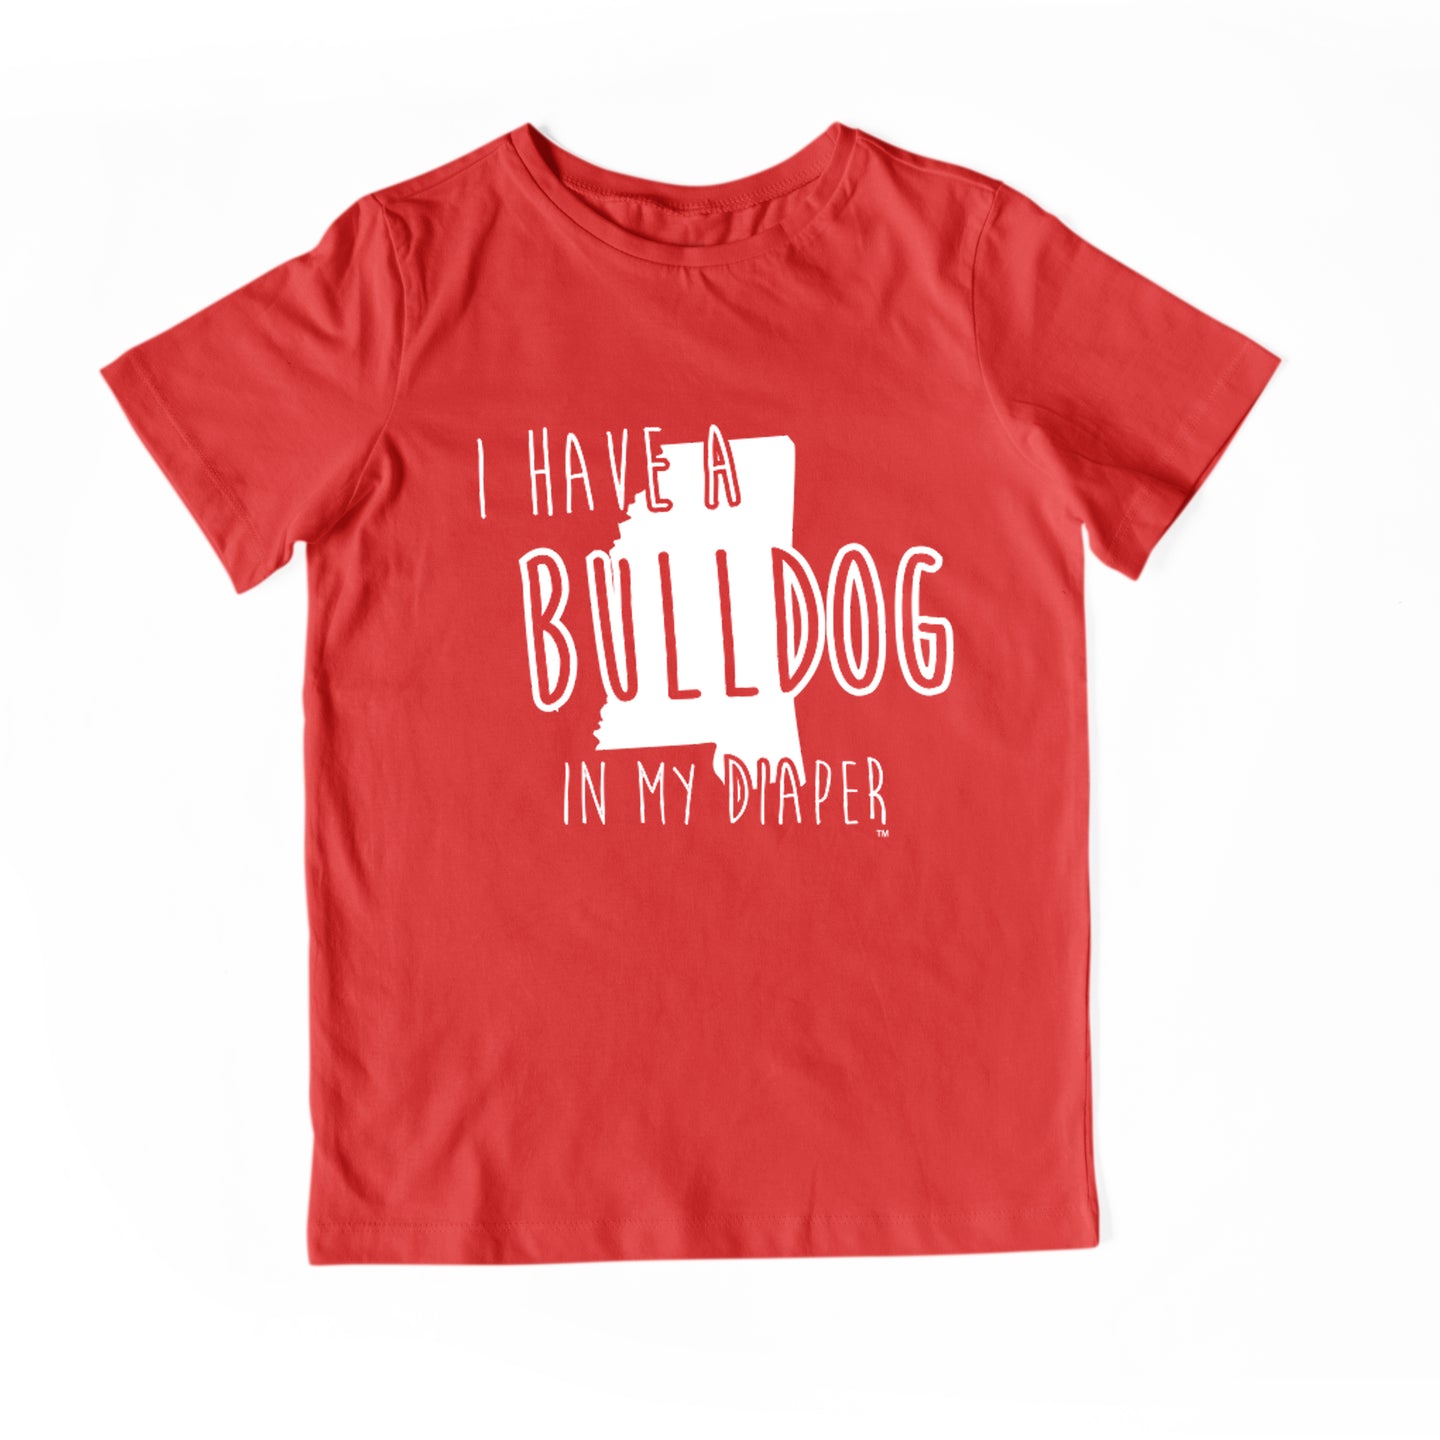 I HAVE A BULLDOG IN MY DIAPER Child Tee